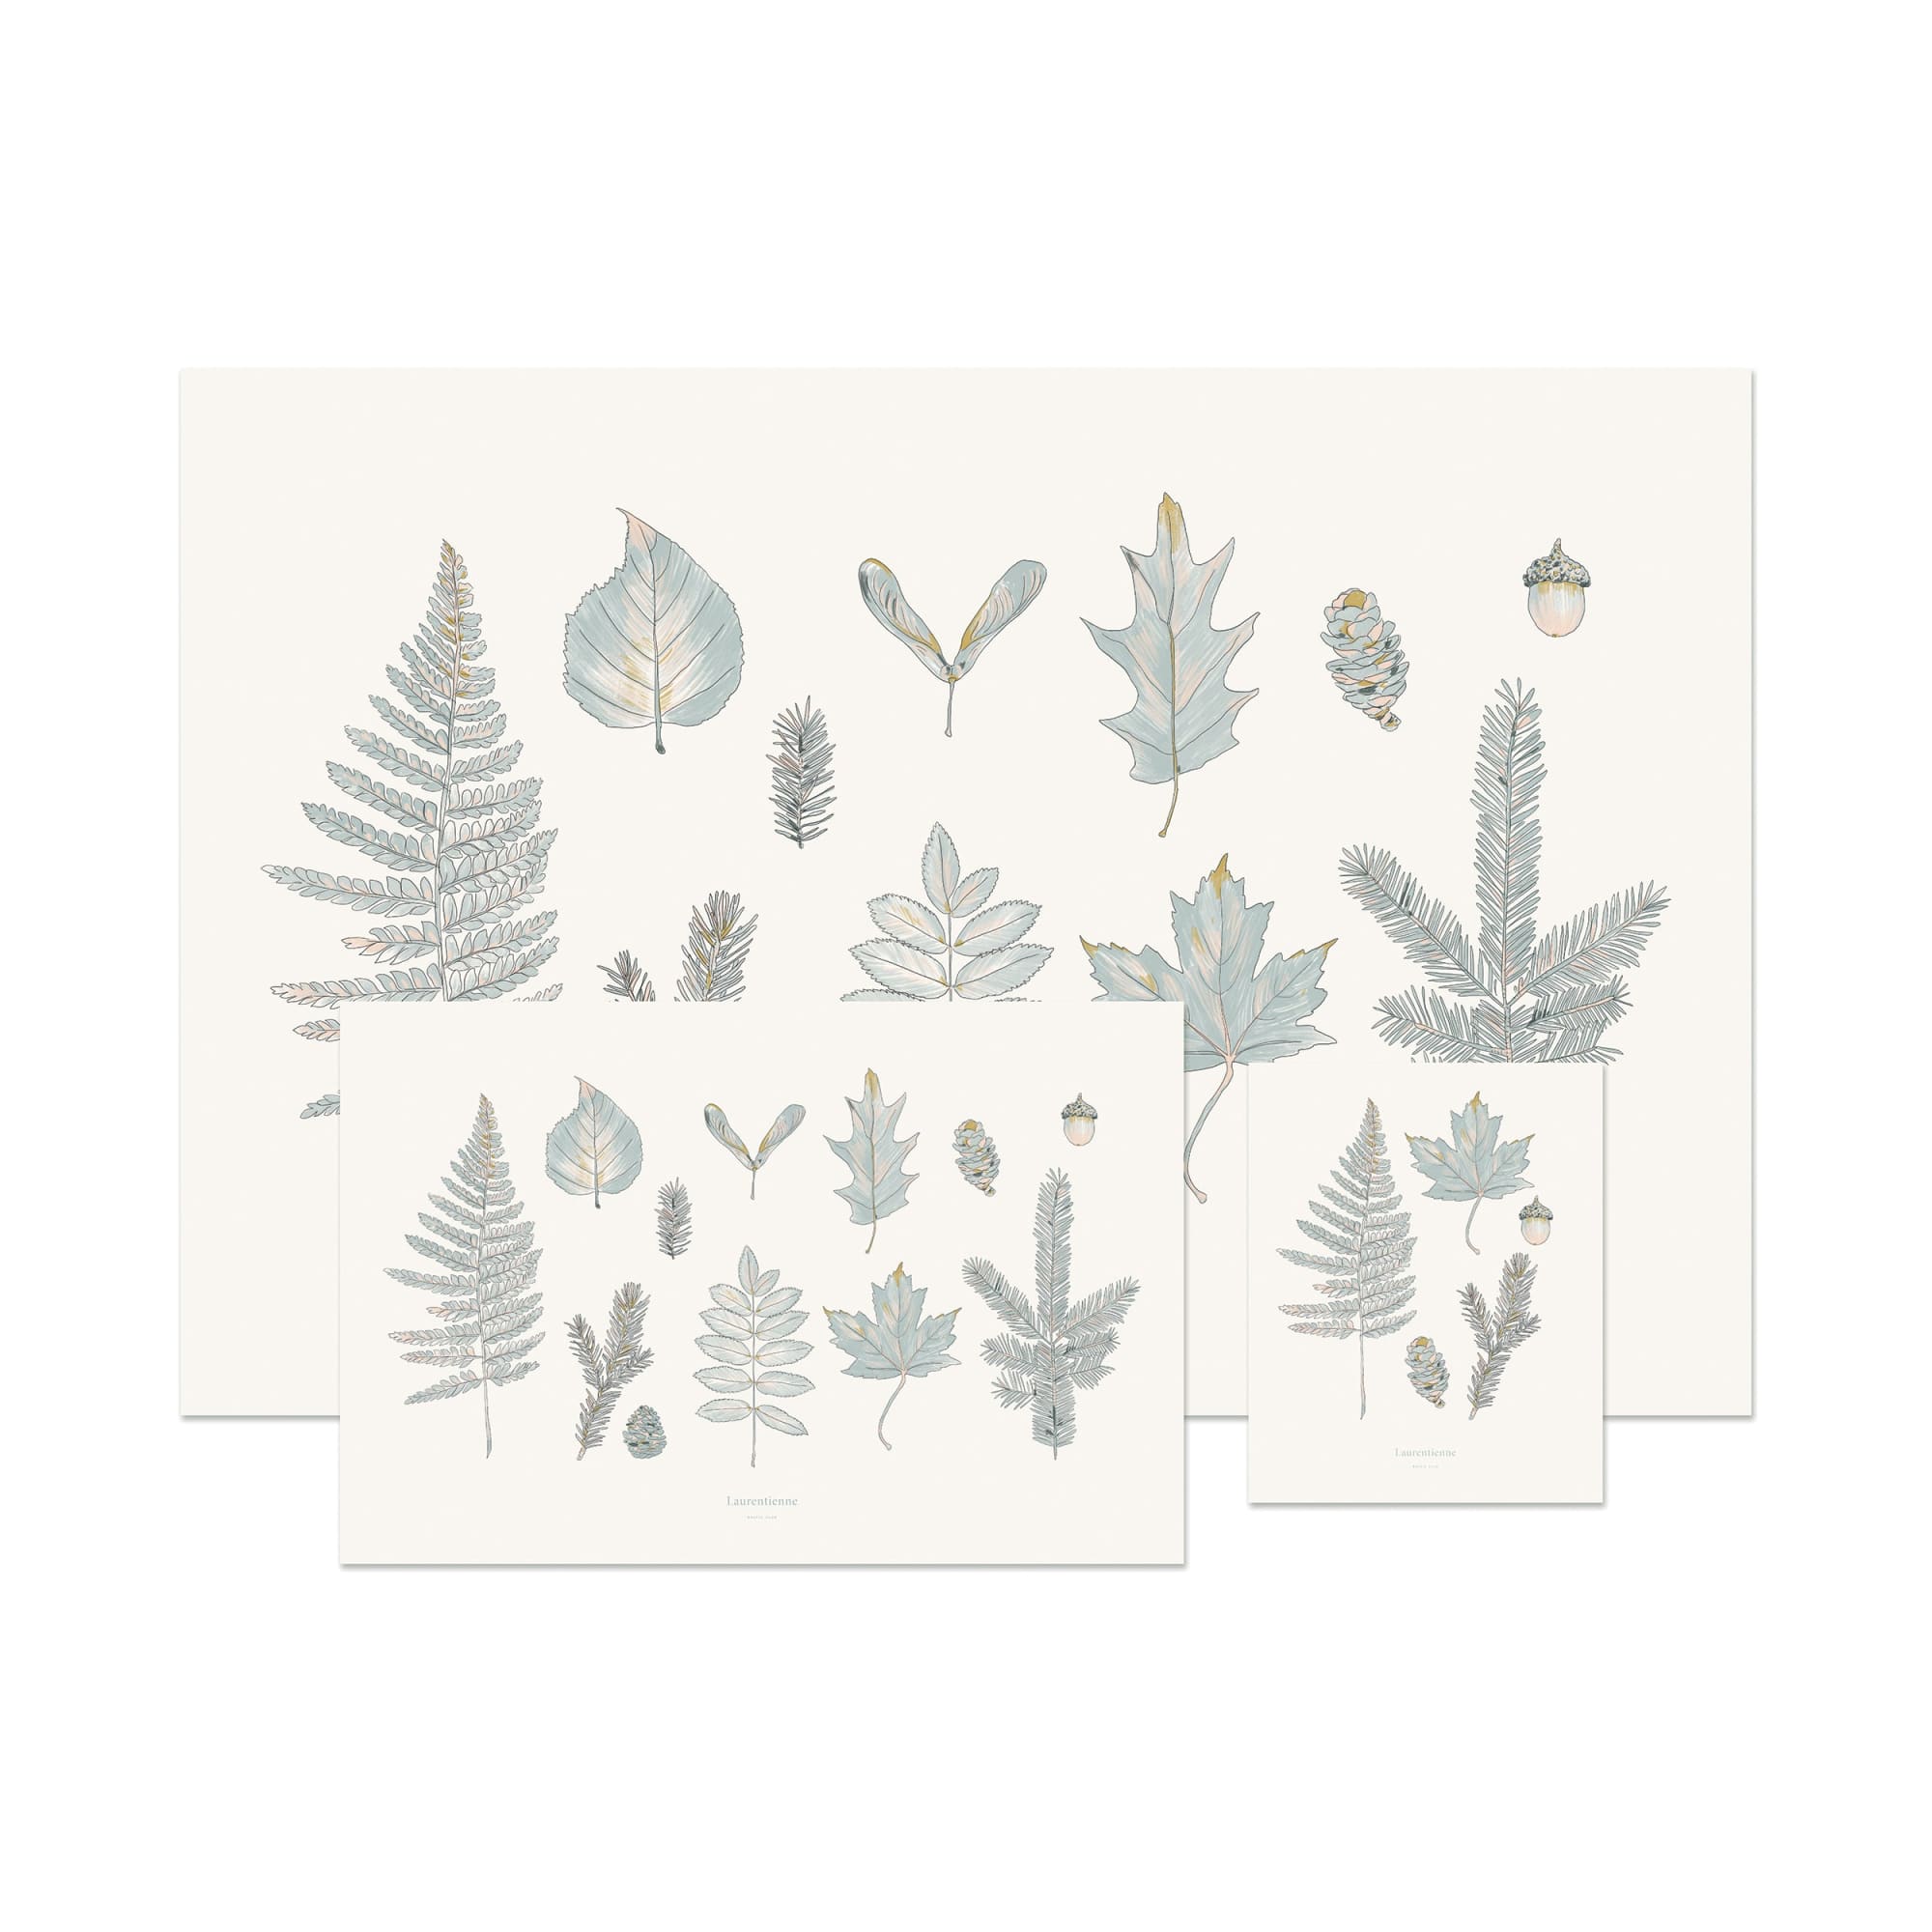 Laurentian Forest Art Print | The Baltic Club